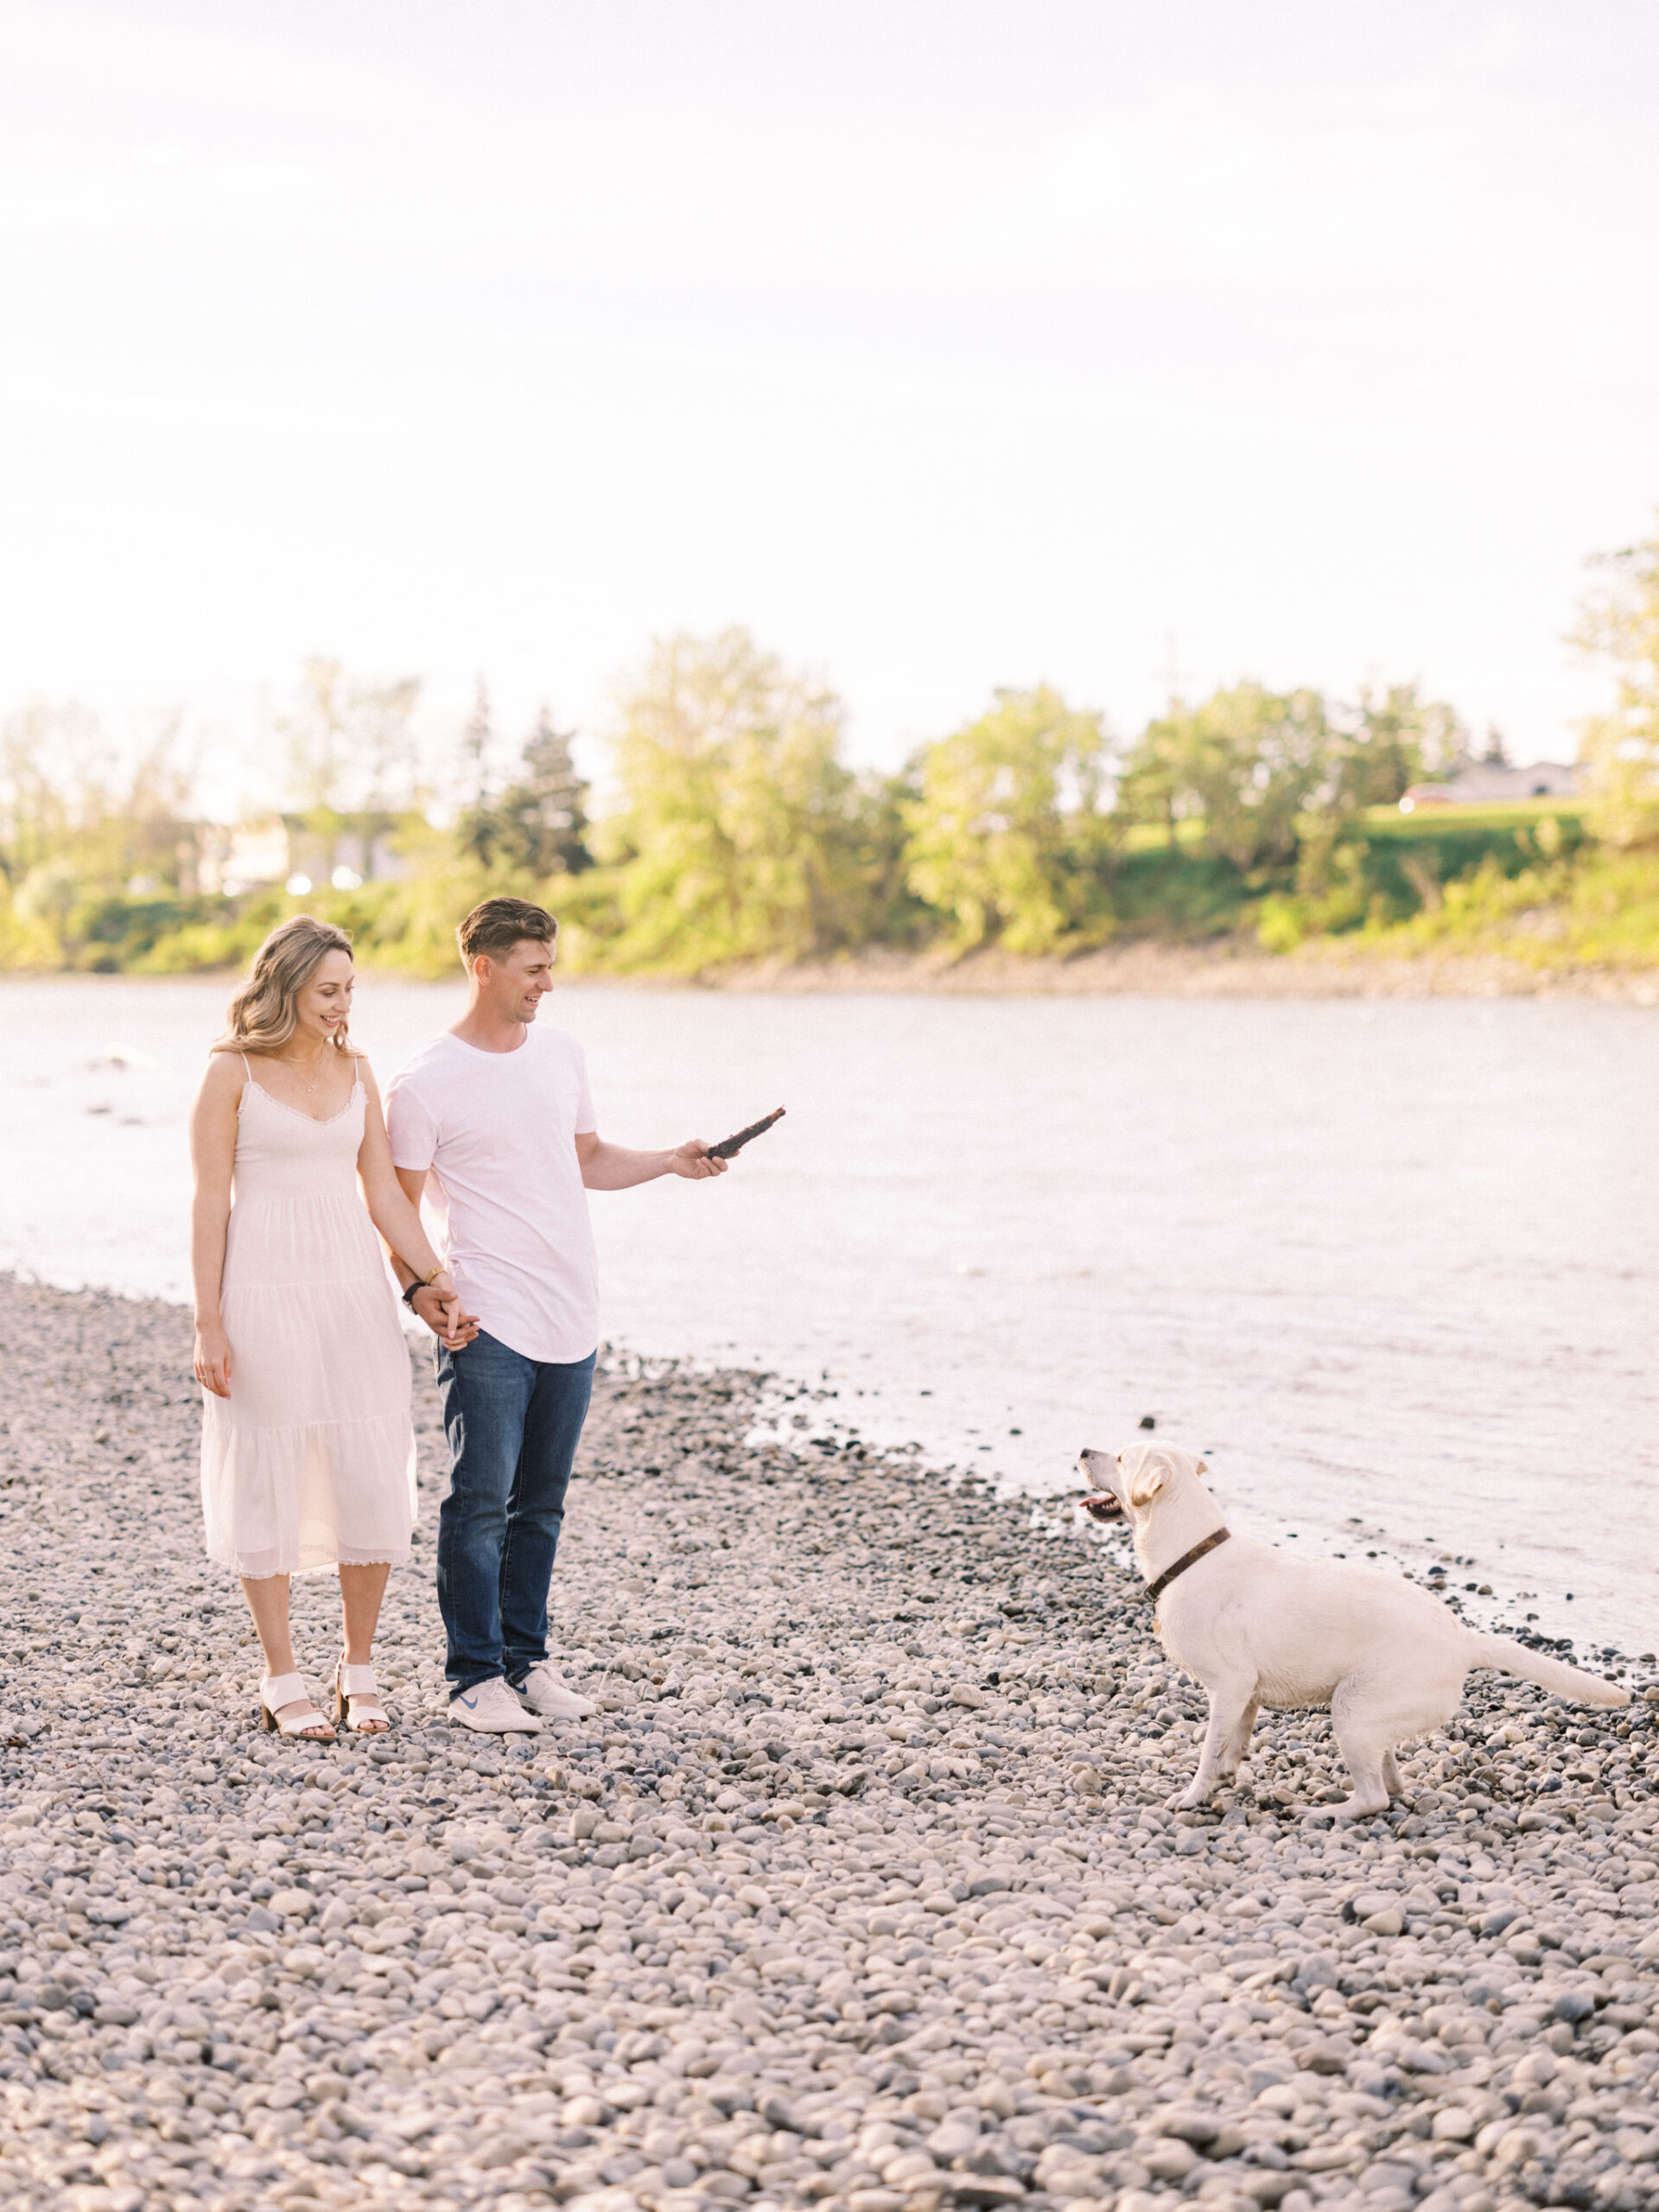 Cherry Blossom Spring Engagement Session, river engagement couple laughing, couple embracing, engagement pose sunset, sunset engagement photos, labrador retriever engagement photos, dog engagement session, puppy engagement session, alberta wedding photographers, alberta photographer, calgary wedding, calgary wedding photographer, spring engagement session, spring photos, nicole sarah, cherry blossom photos, cherry blossom engagement, wedding poses, white dress engagement, sundress white, engagement photos, bow river, puppy engagement photos, neutral engagement photos